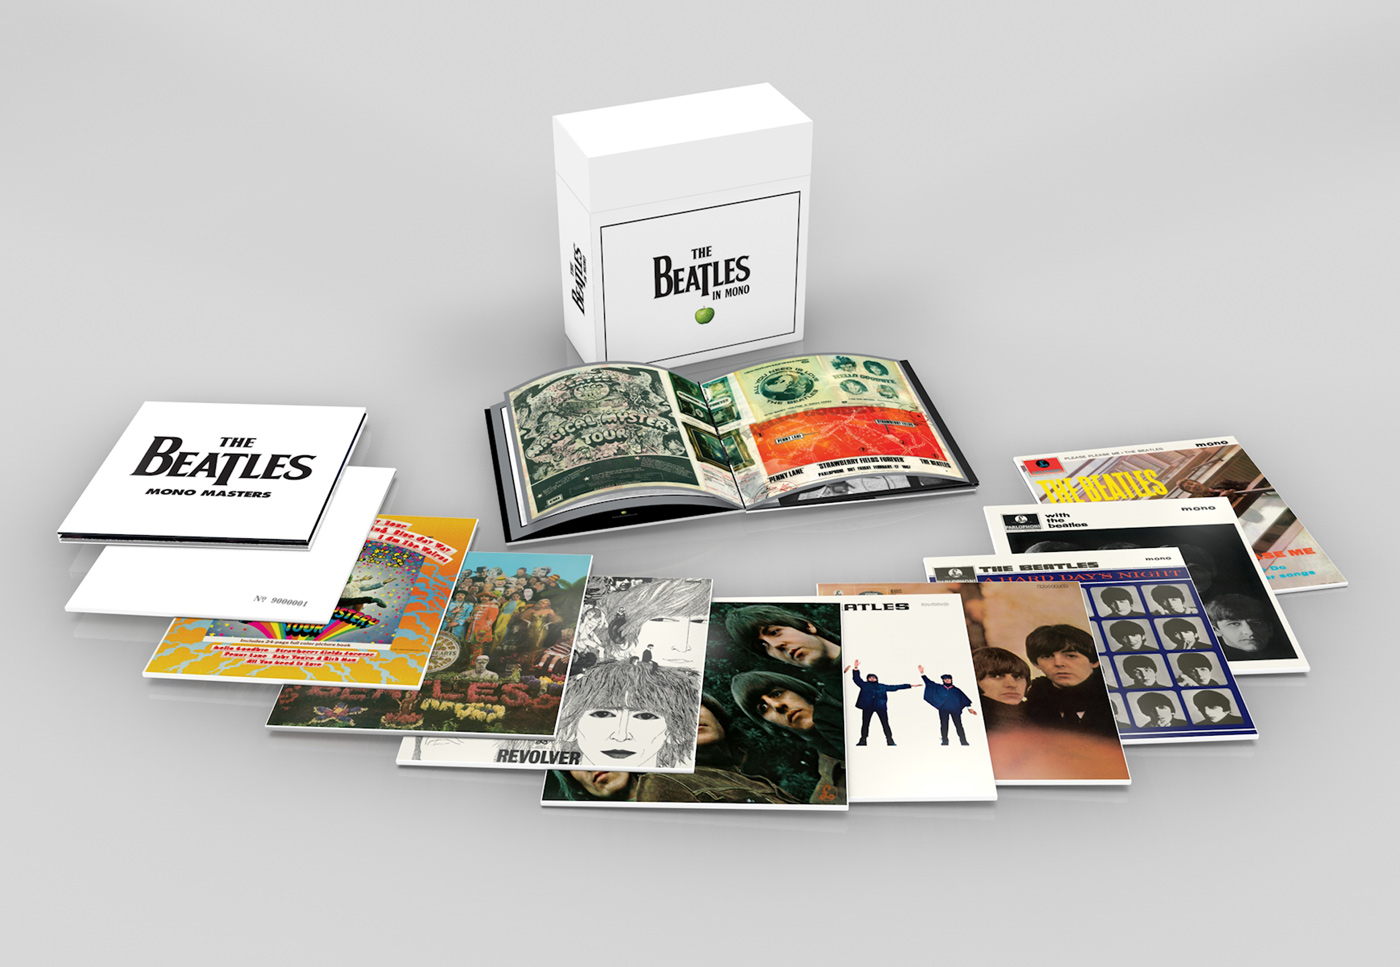 THE BEATLES GET BACK TO MONO - THE ORIGINAL MONO STUDIO ALBUMS REMASTERED AT ABBEY ROAD DIRECTLY FROM THE ANALOGUE MASTERS FOR VINYL RELEASE